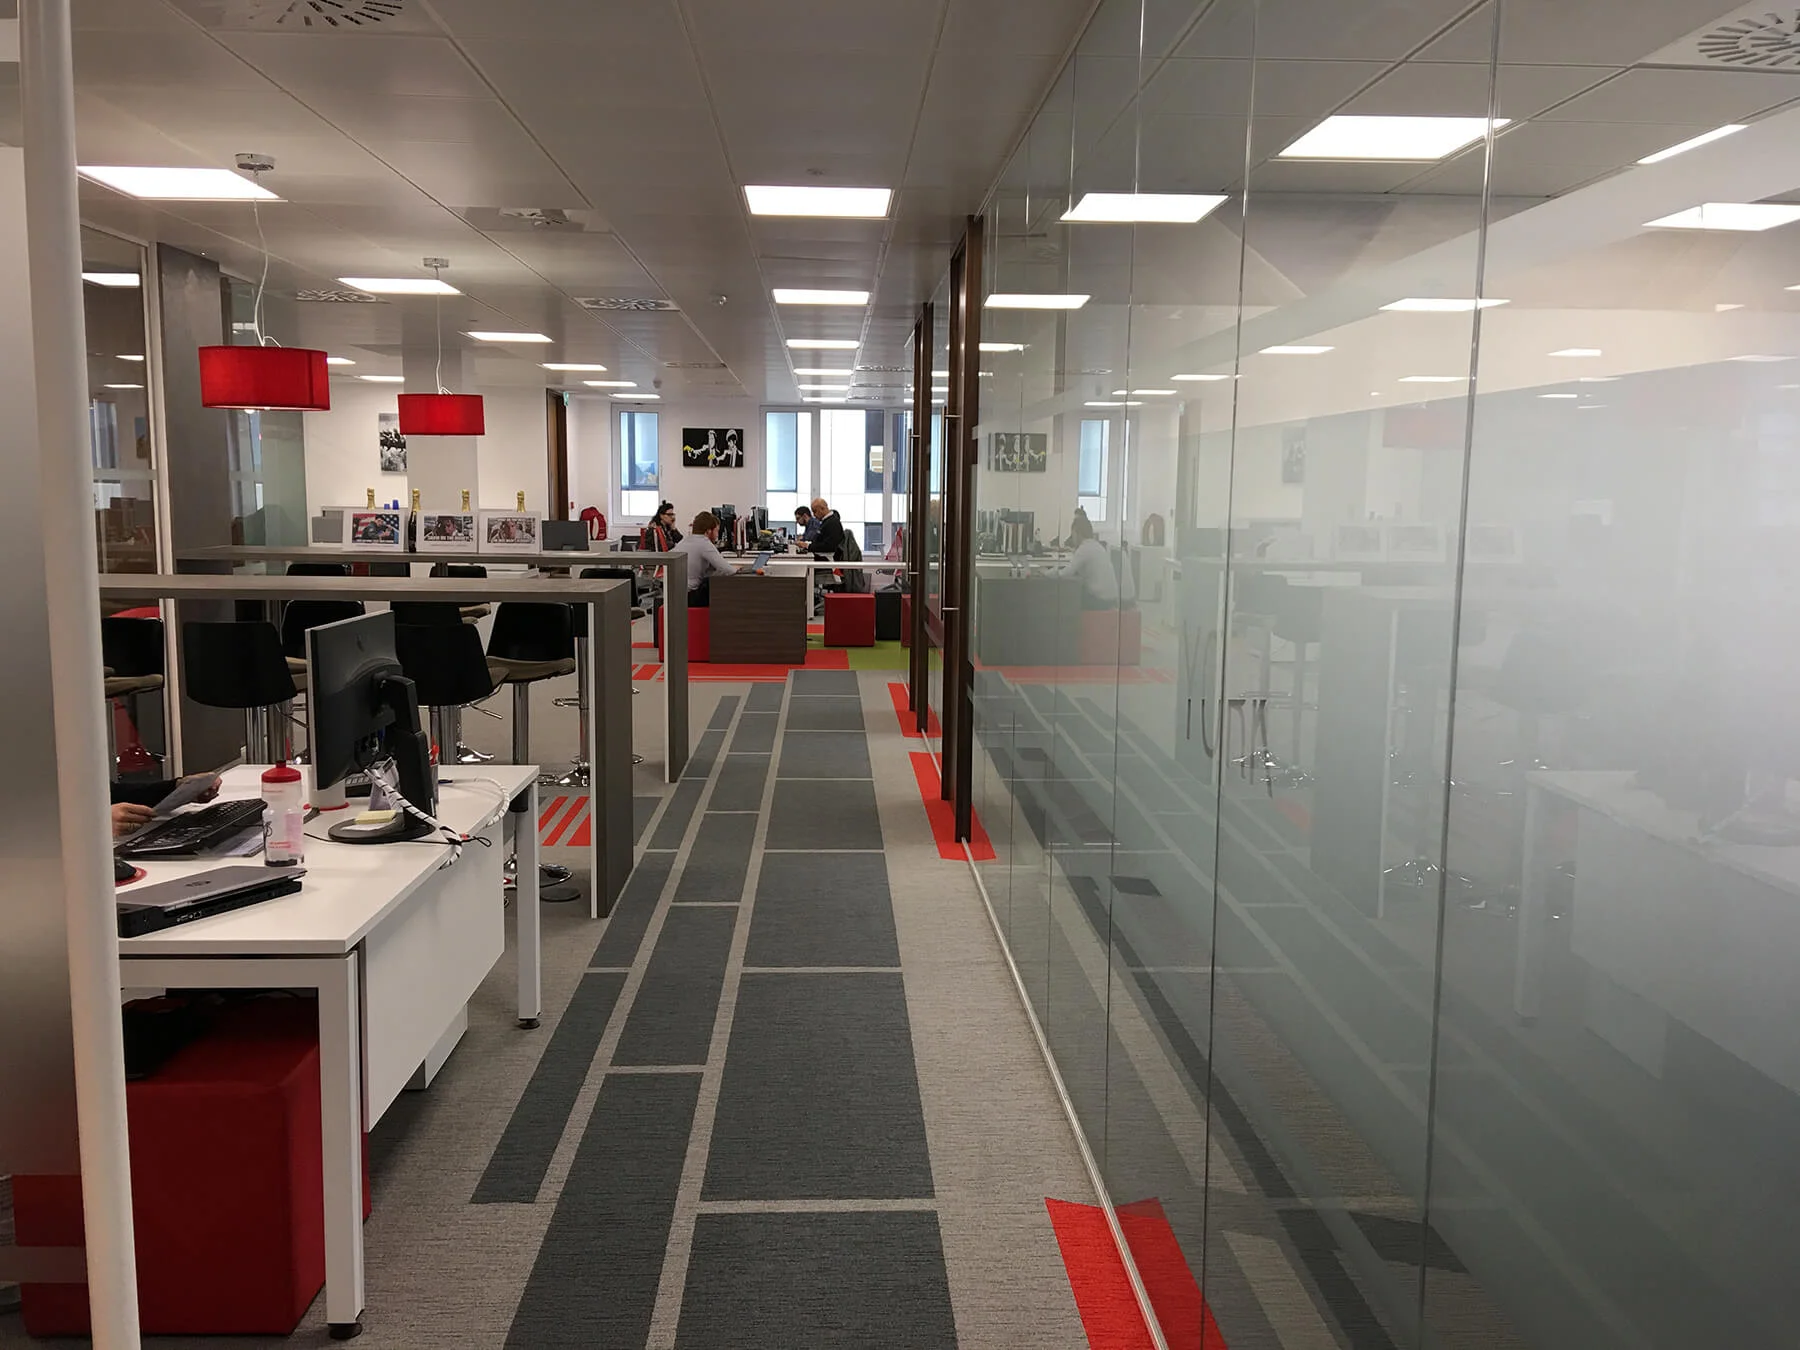 Office space with high desks chairs designer floor and frameless glass partitions